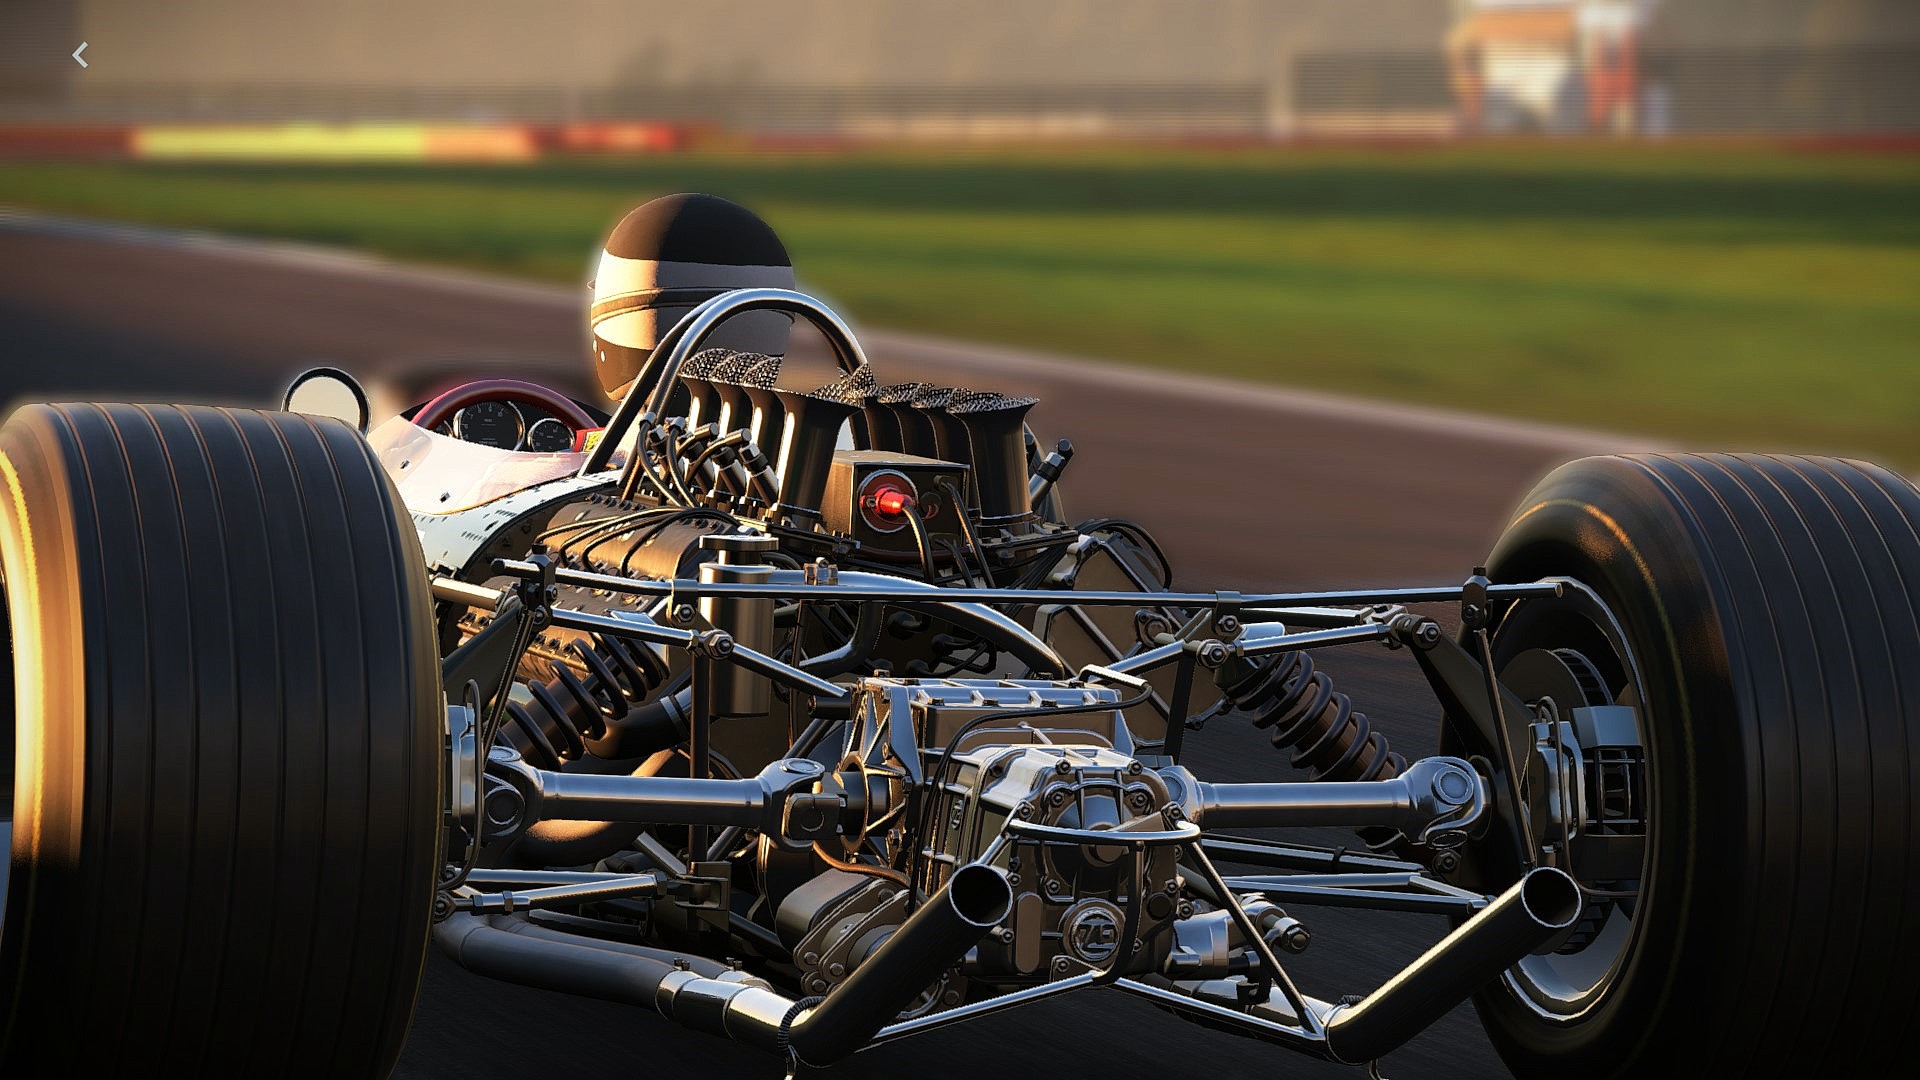 Spa Francorchamps, 1968 Lotus 49, Project cars Wallpaper